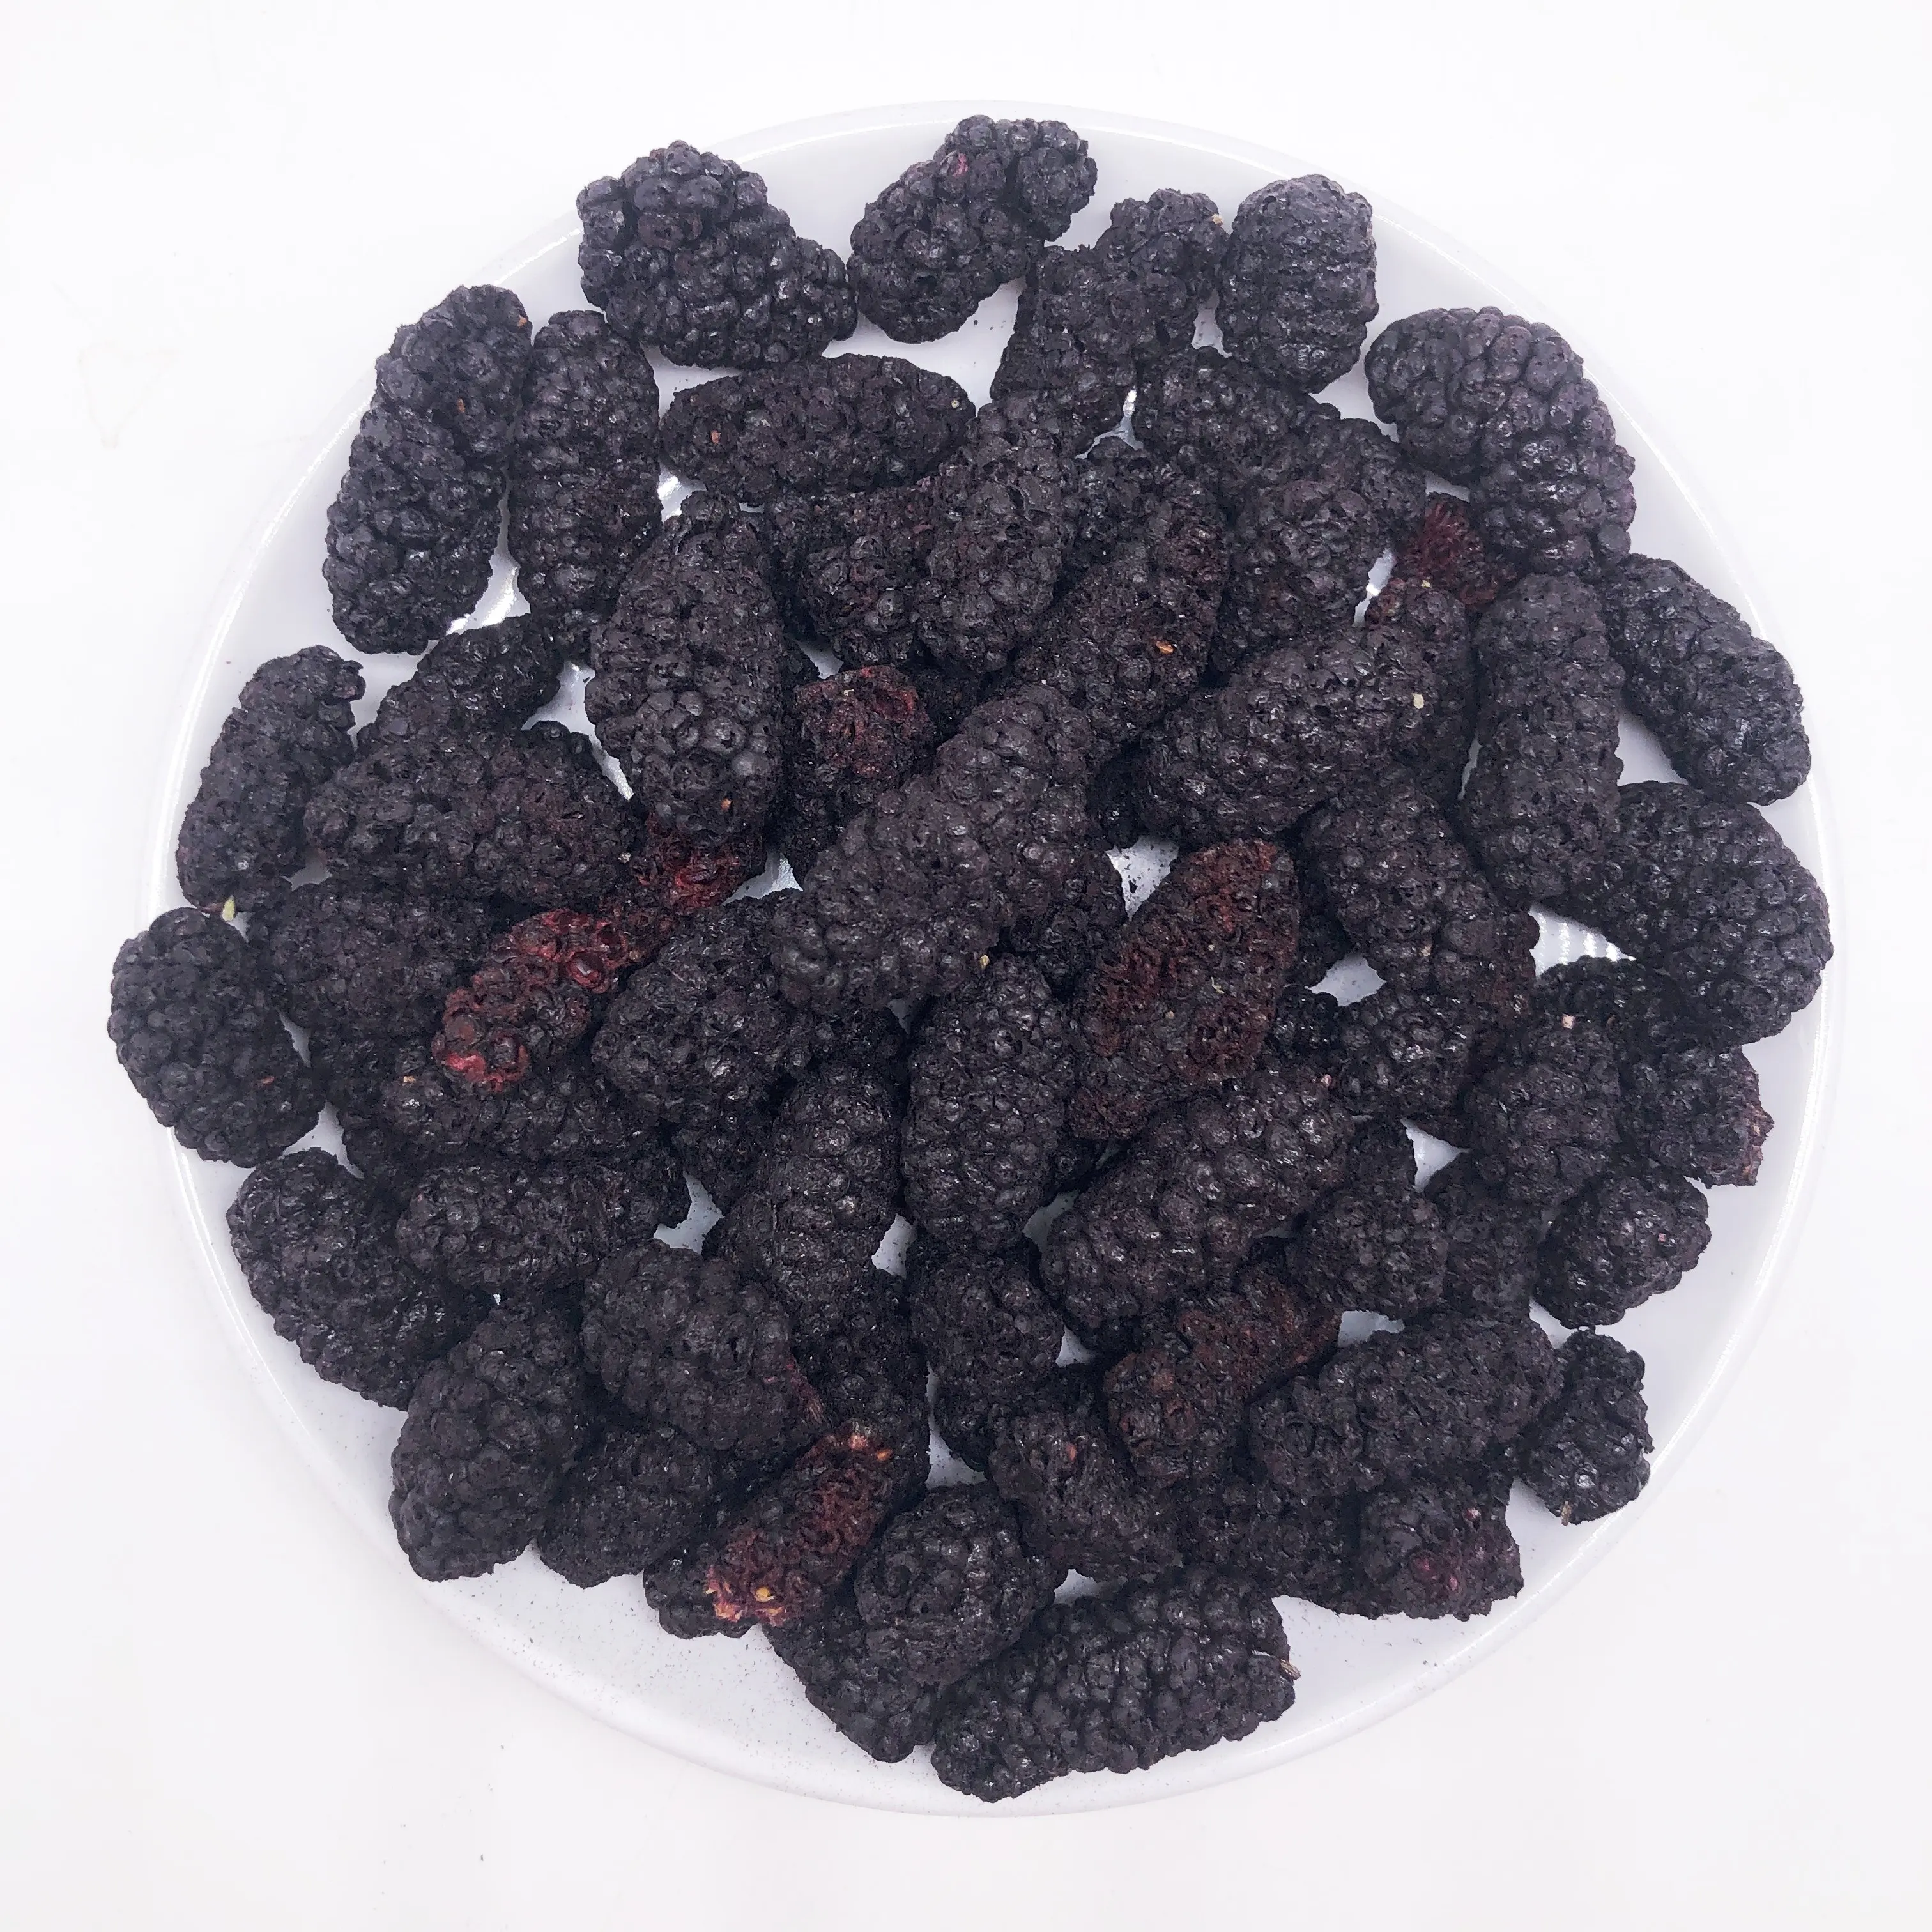 FYFD023F No Additives Natual Freeze-Dried Whole Mulberry High Quality Freeze Dry Morus Alba Fruit